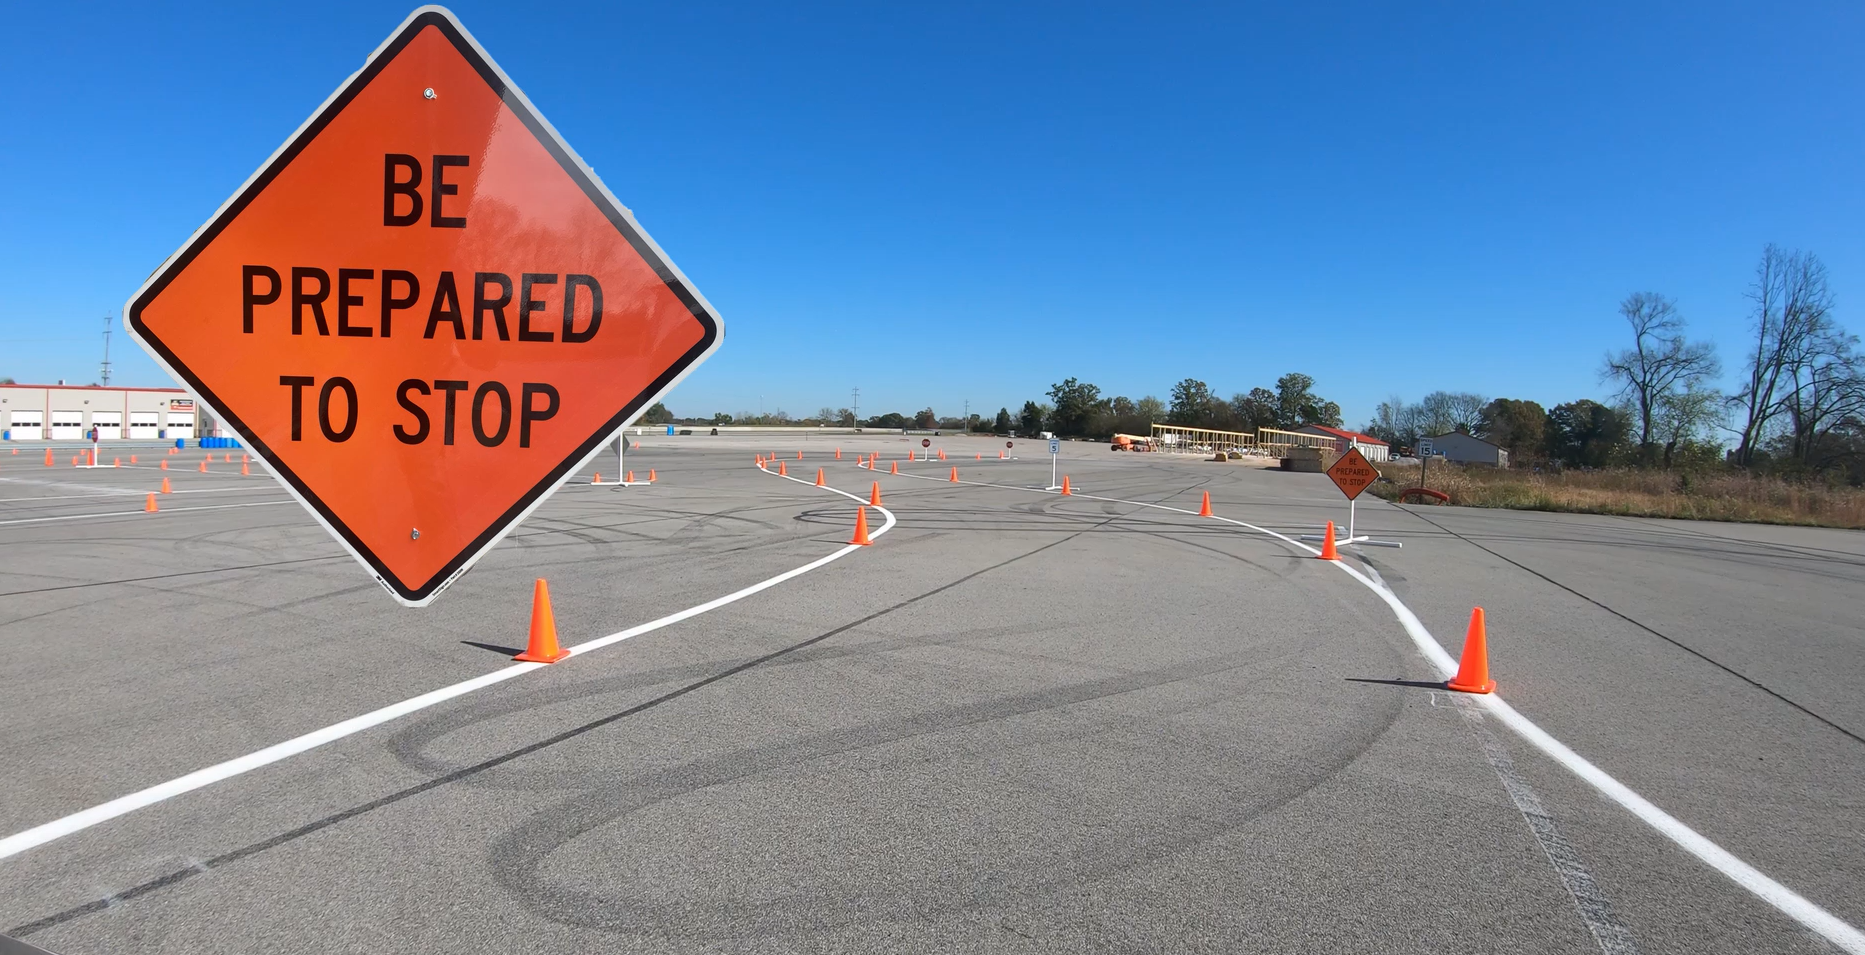 Traffic Safety Education Foundation Practice Driving Course Resumes with Spring Dates at NCM Motorsports Park